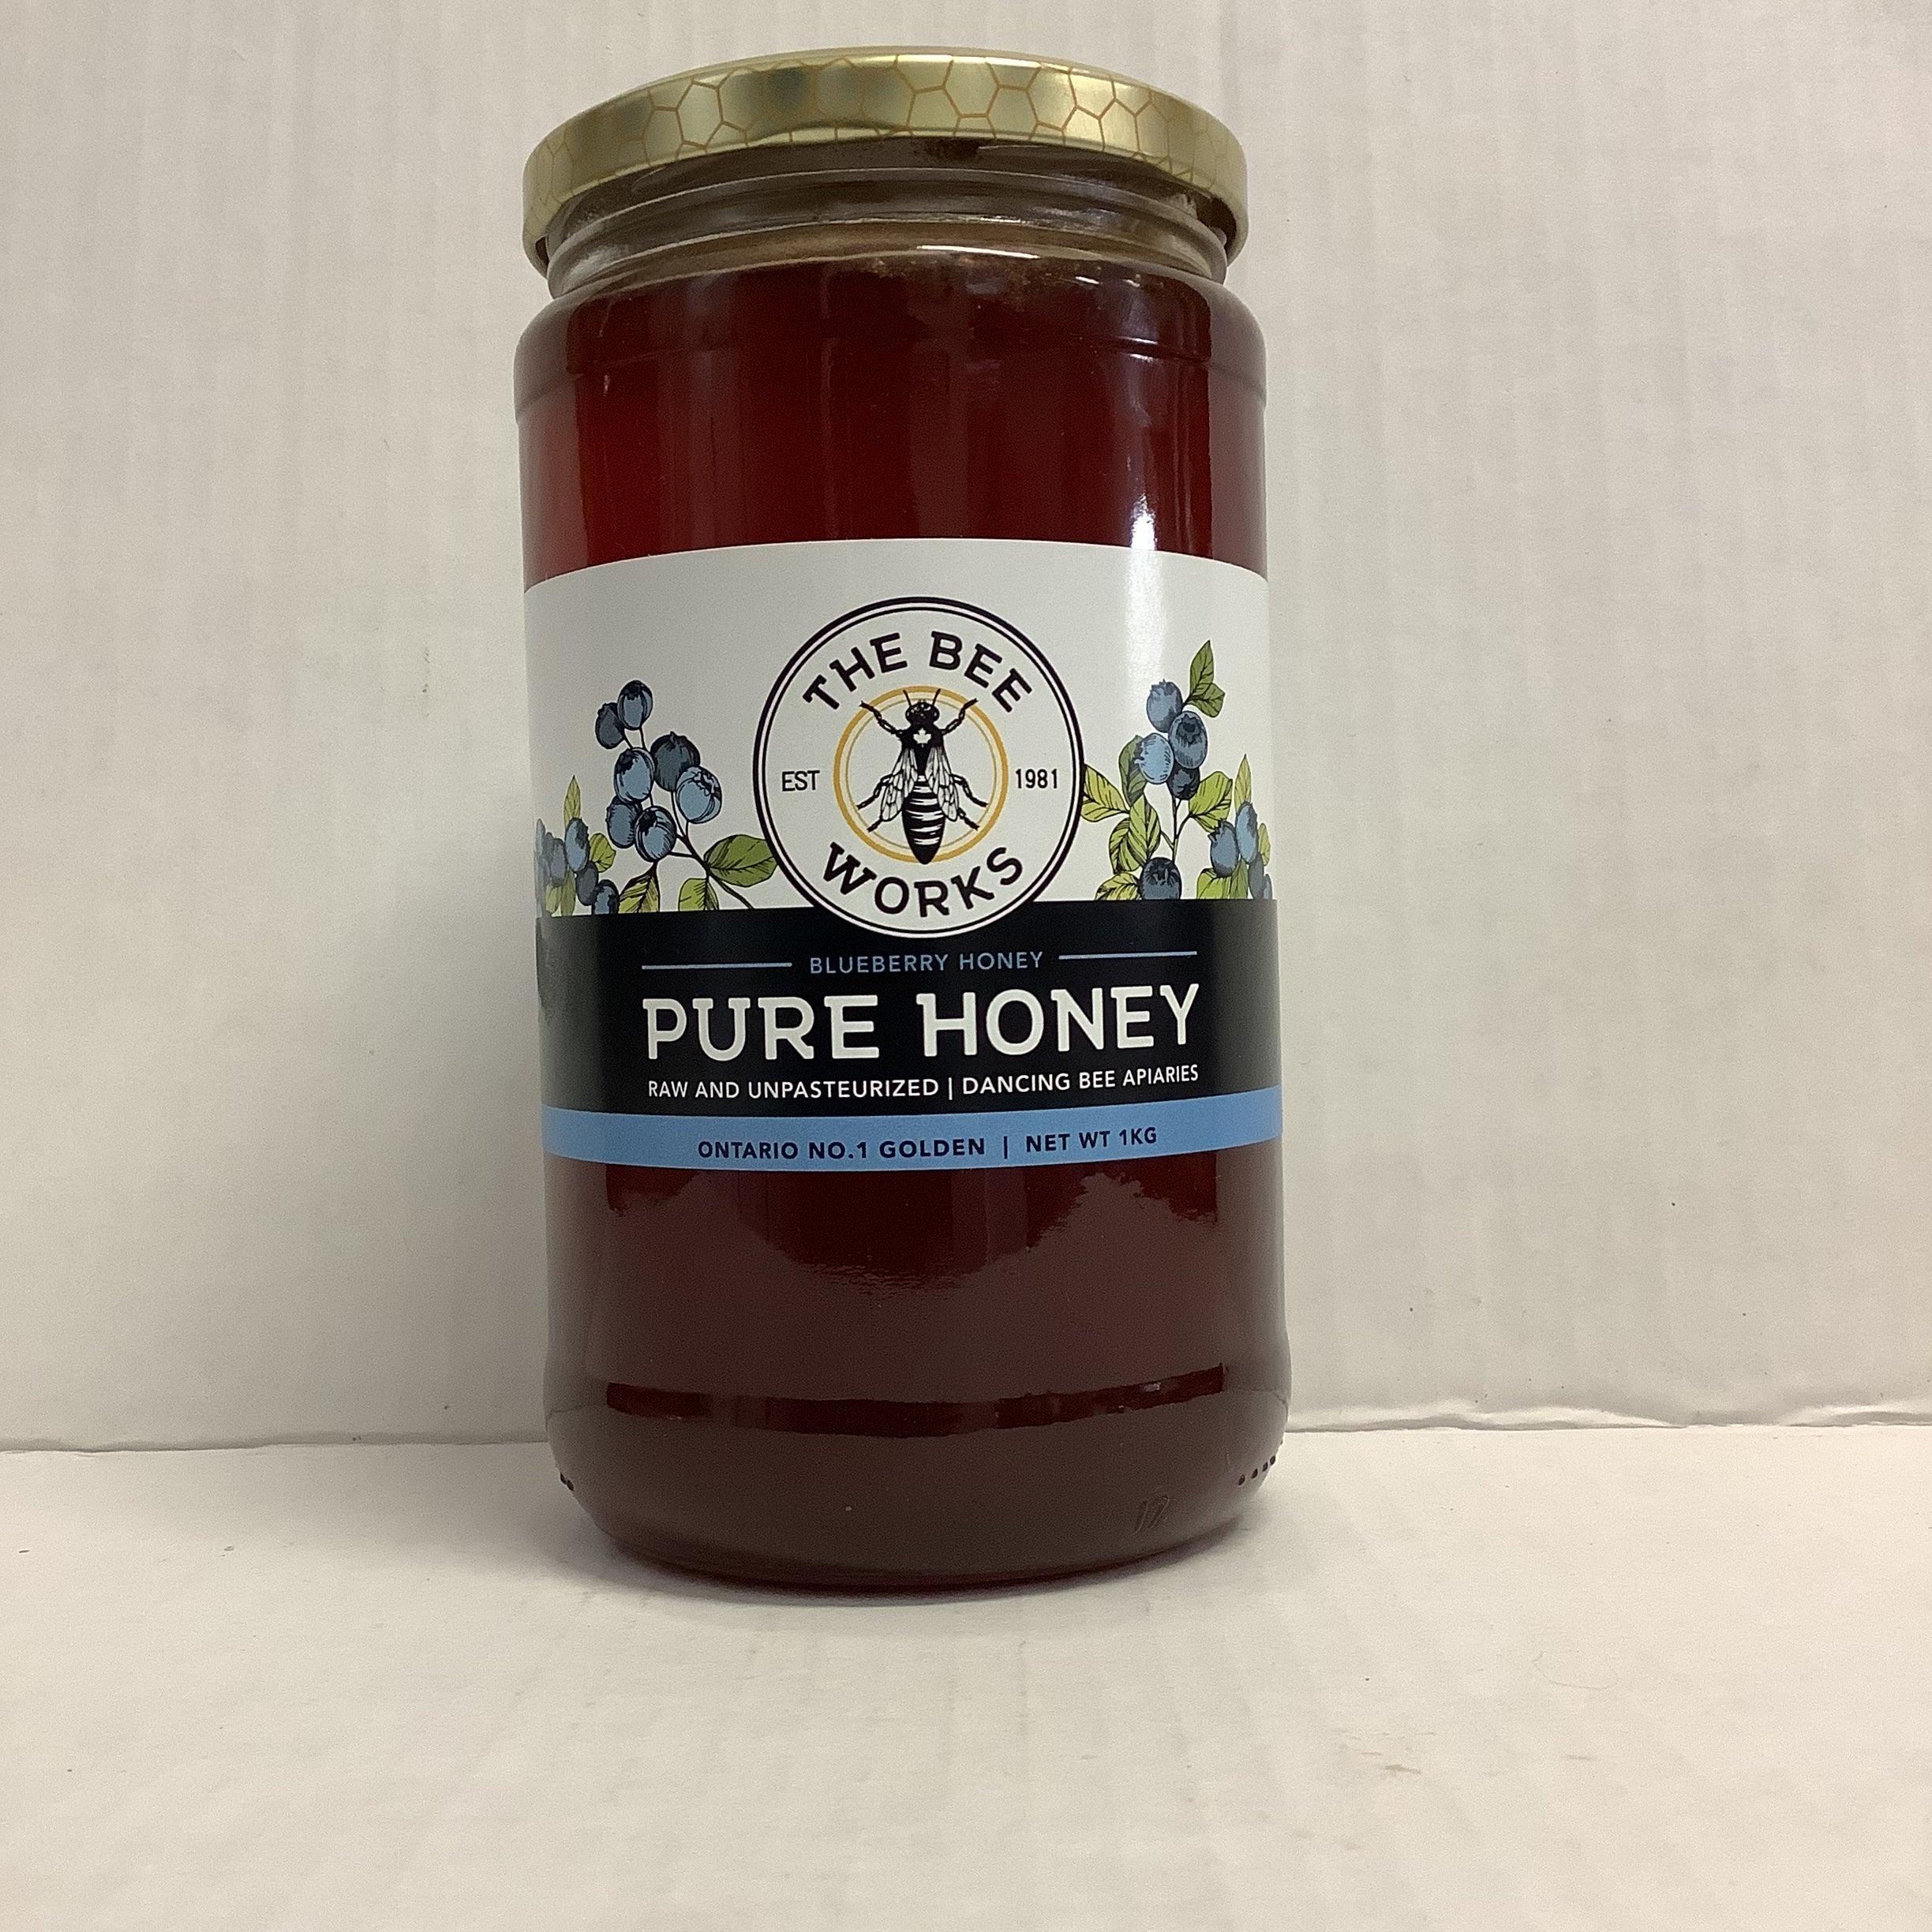 The Bee Works Blueberry Honey 1kg